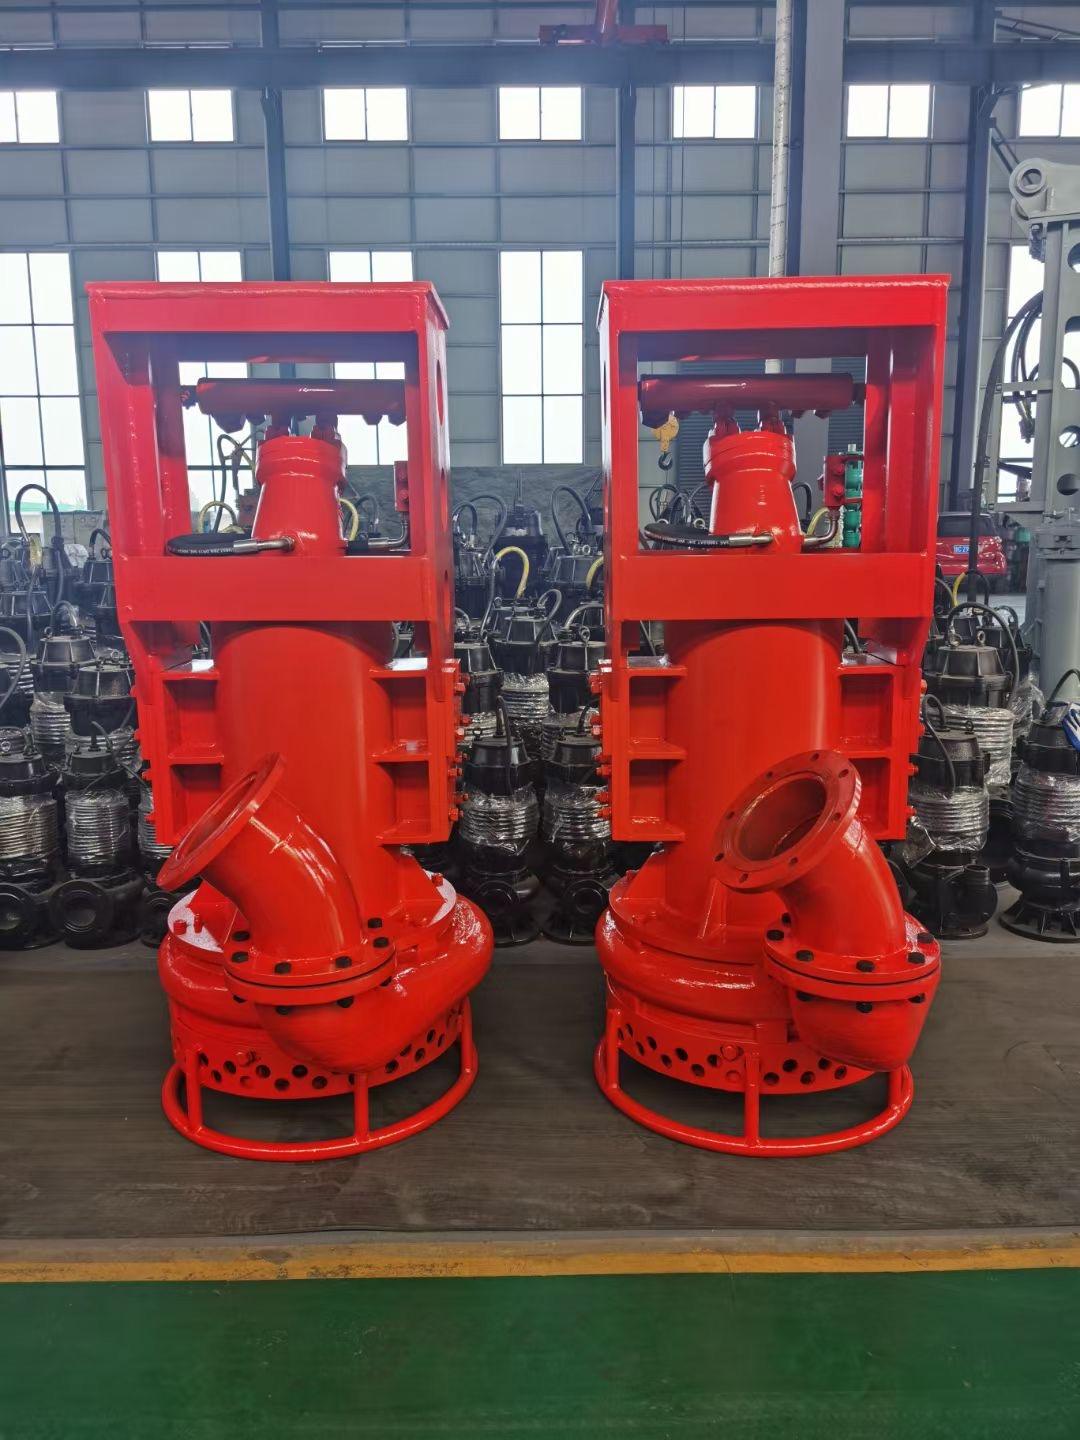 China sand dredging mining submersible pump ac the hydraulic dredge sewage electric submersible slurry pump